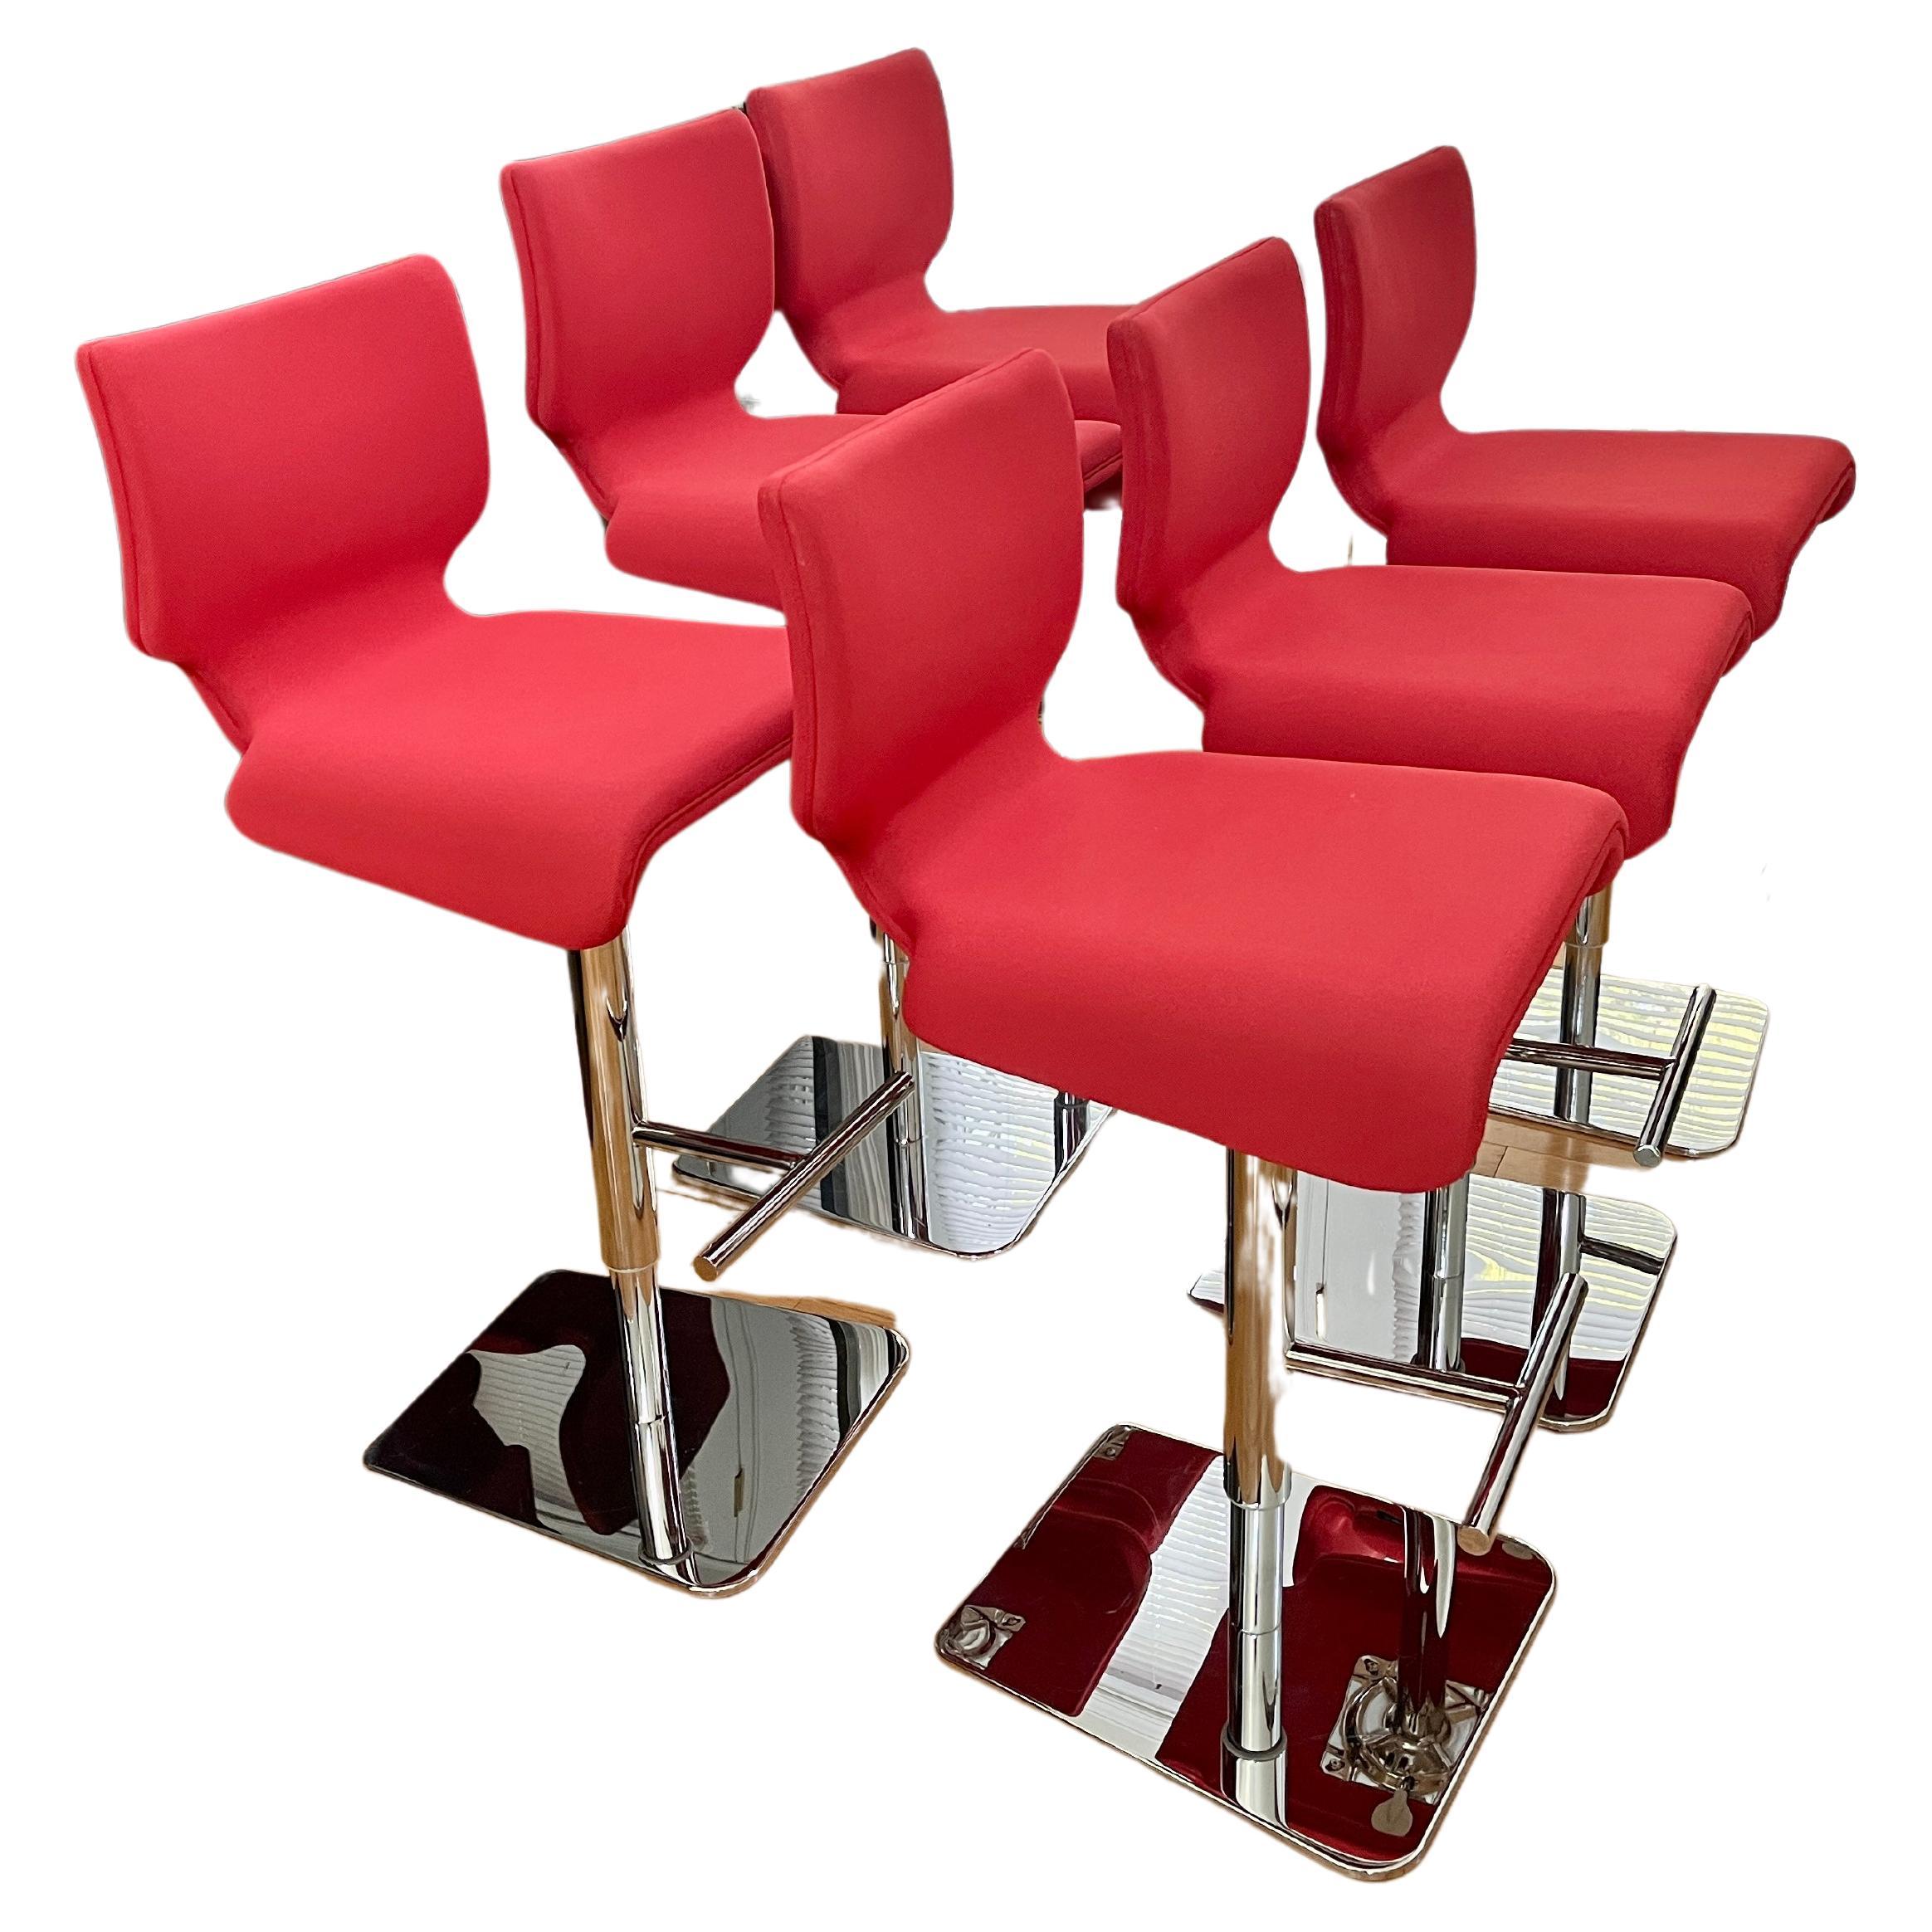 Contemporary Roche Bobois Chabada Stool, Swivel, Footrest, Chrome Plated - 6 Available For Sale